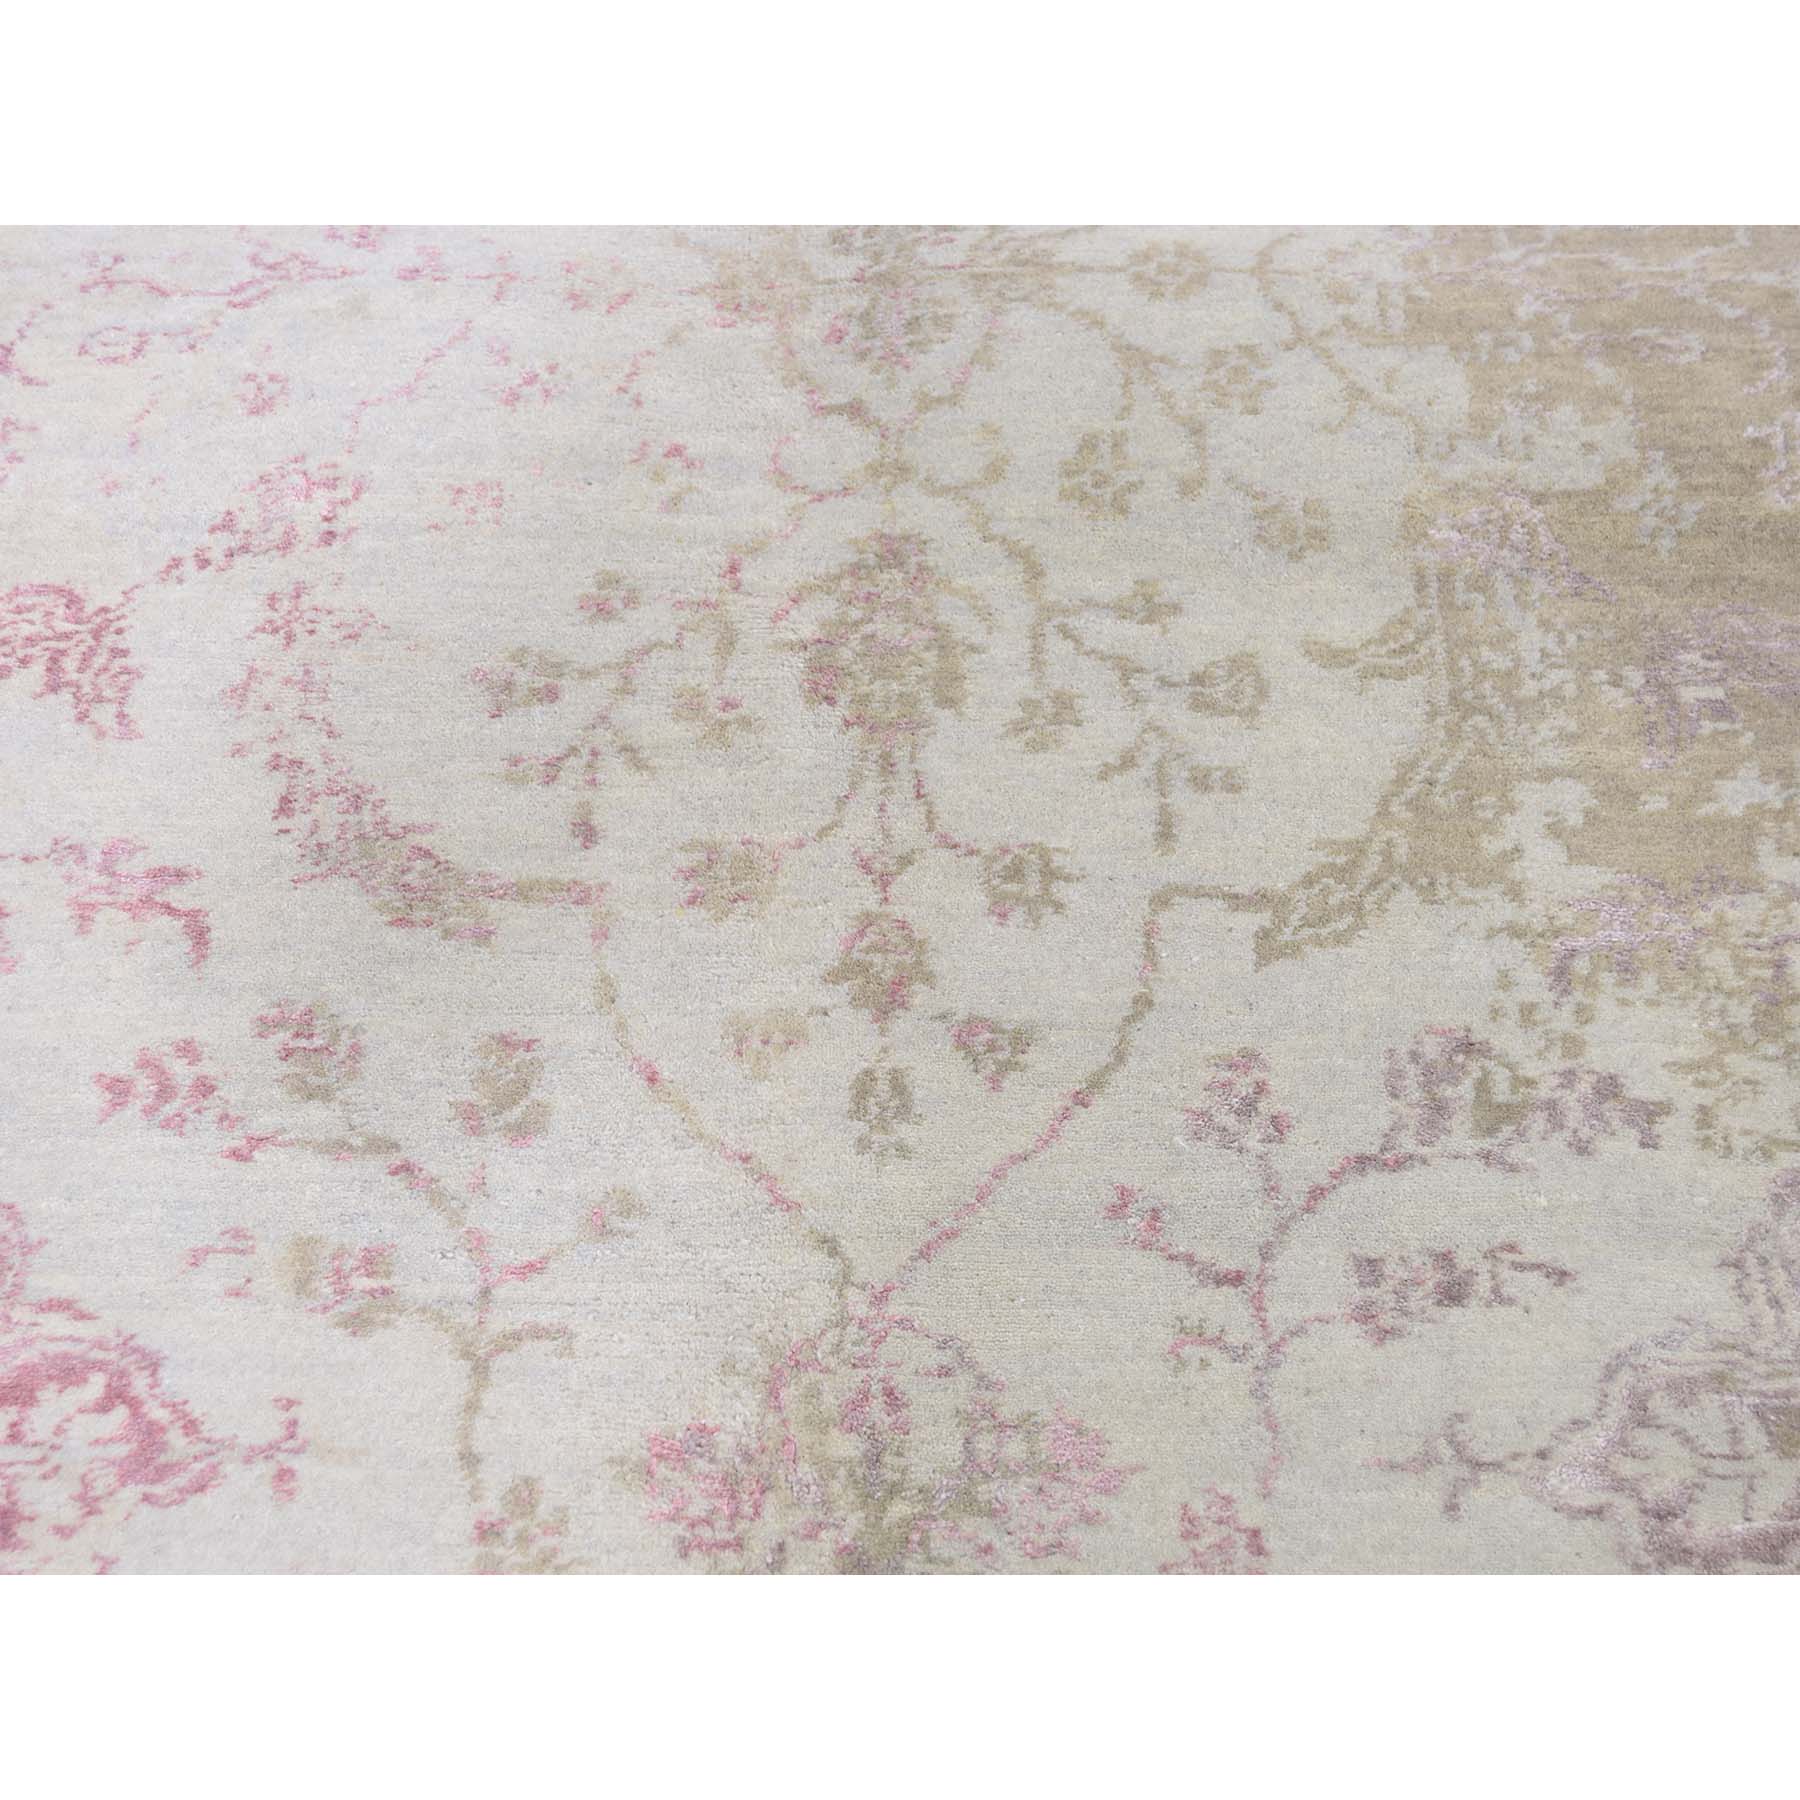 12'x15'6" Oversize Wool And Silk With Touch Of Pink Hand Woven Oriental Rug 